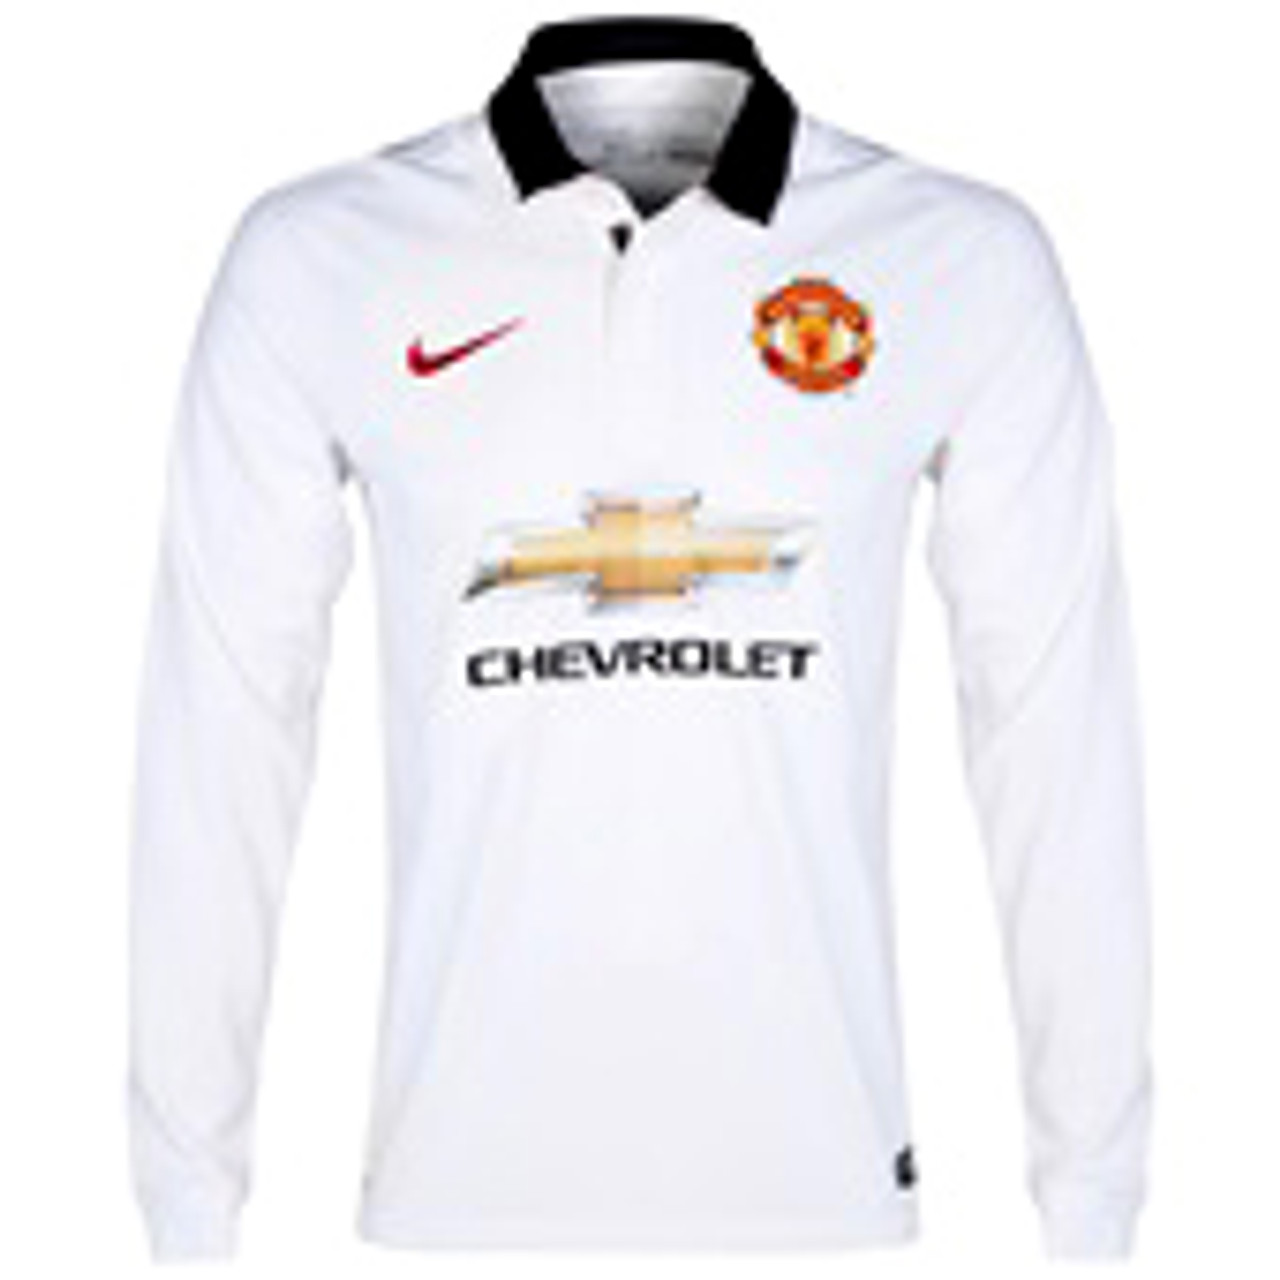 manchester united 2015 jersey